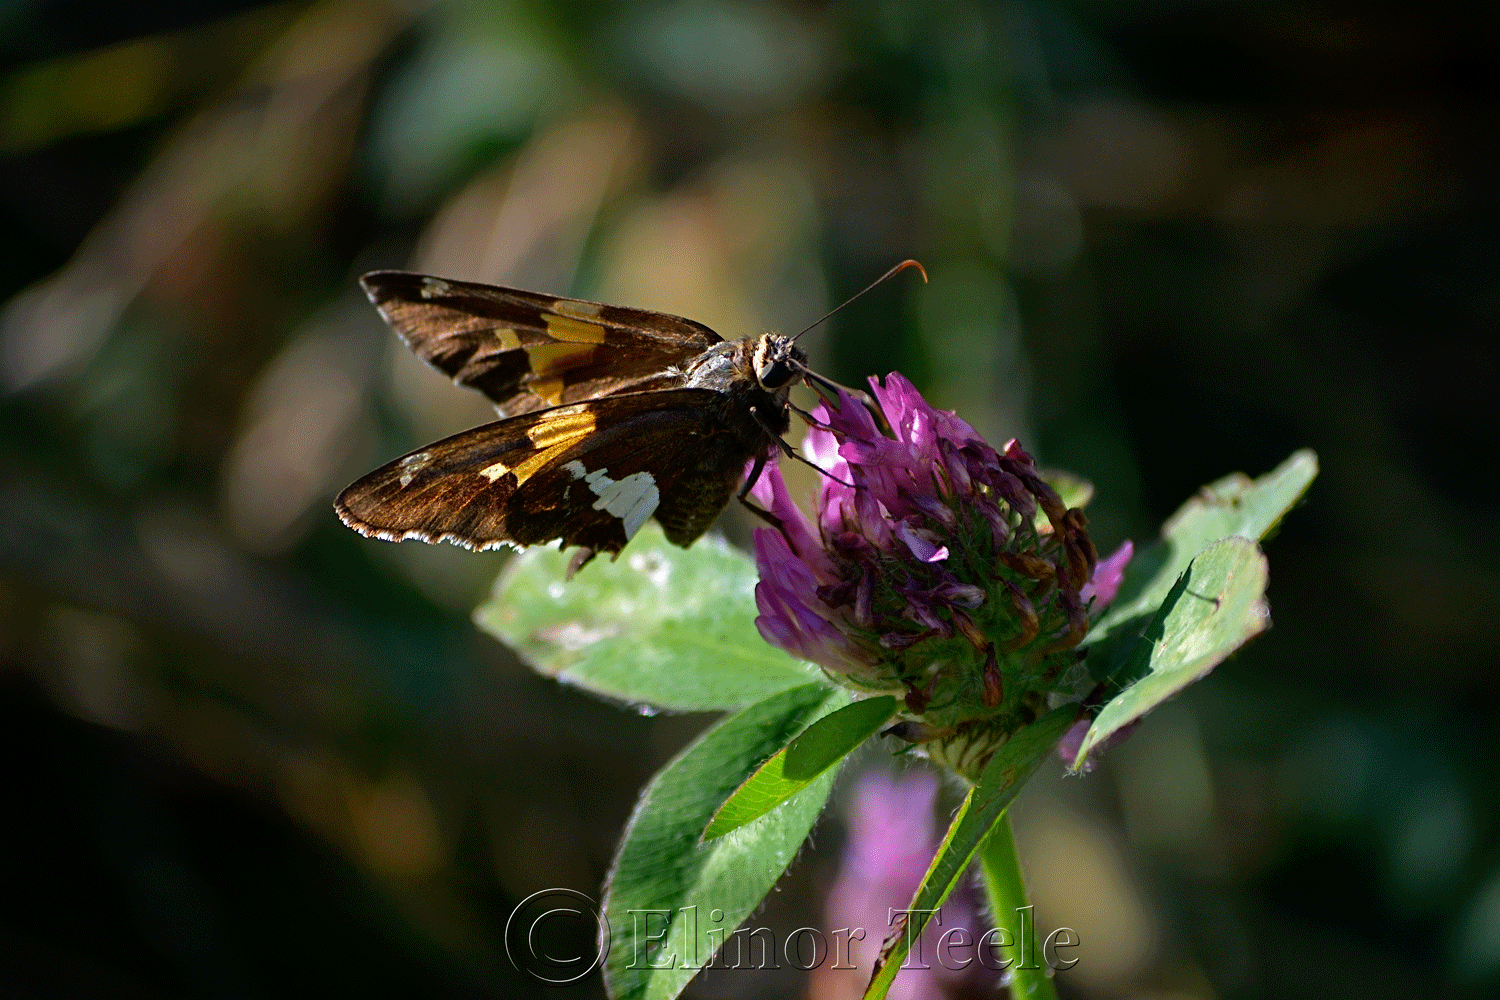 Silver-Spotted Skipper Butterfly